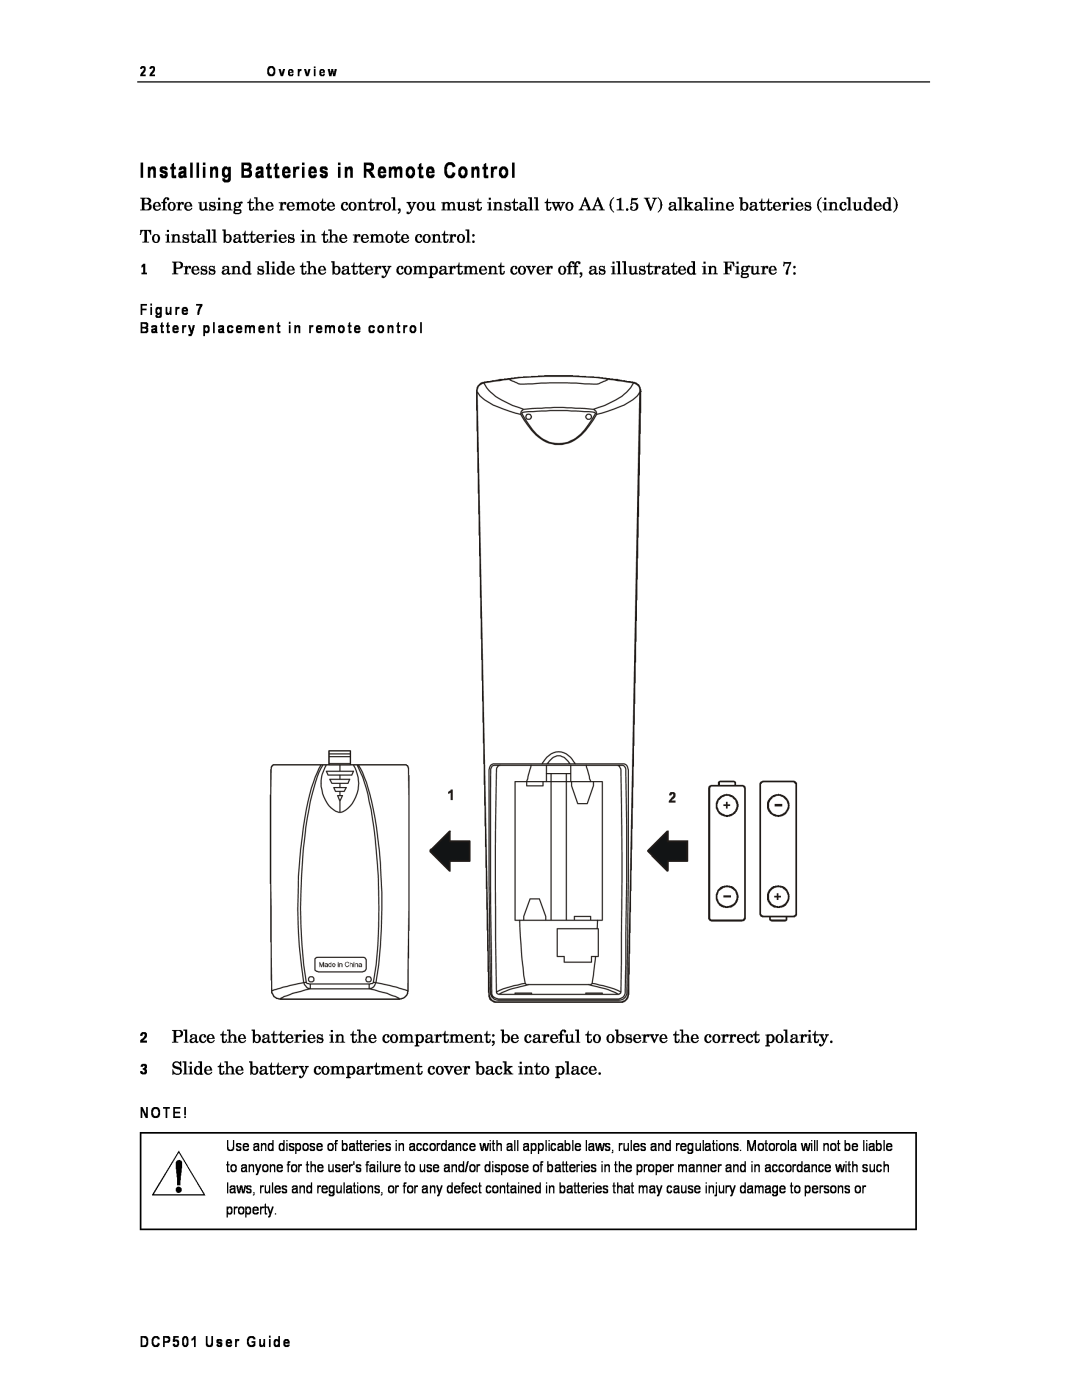 Motorola Installing Batteries in Remote Control, Figure Battery placemen t in r emo te contro l, DCP501 User Guide 